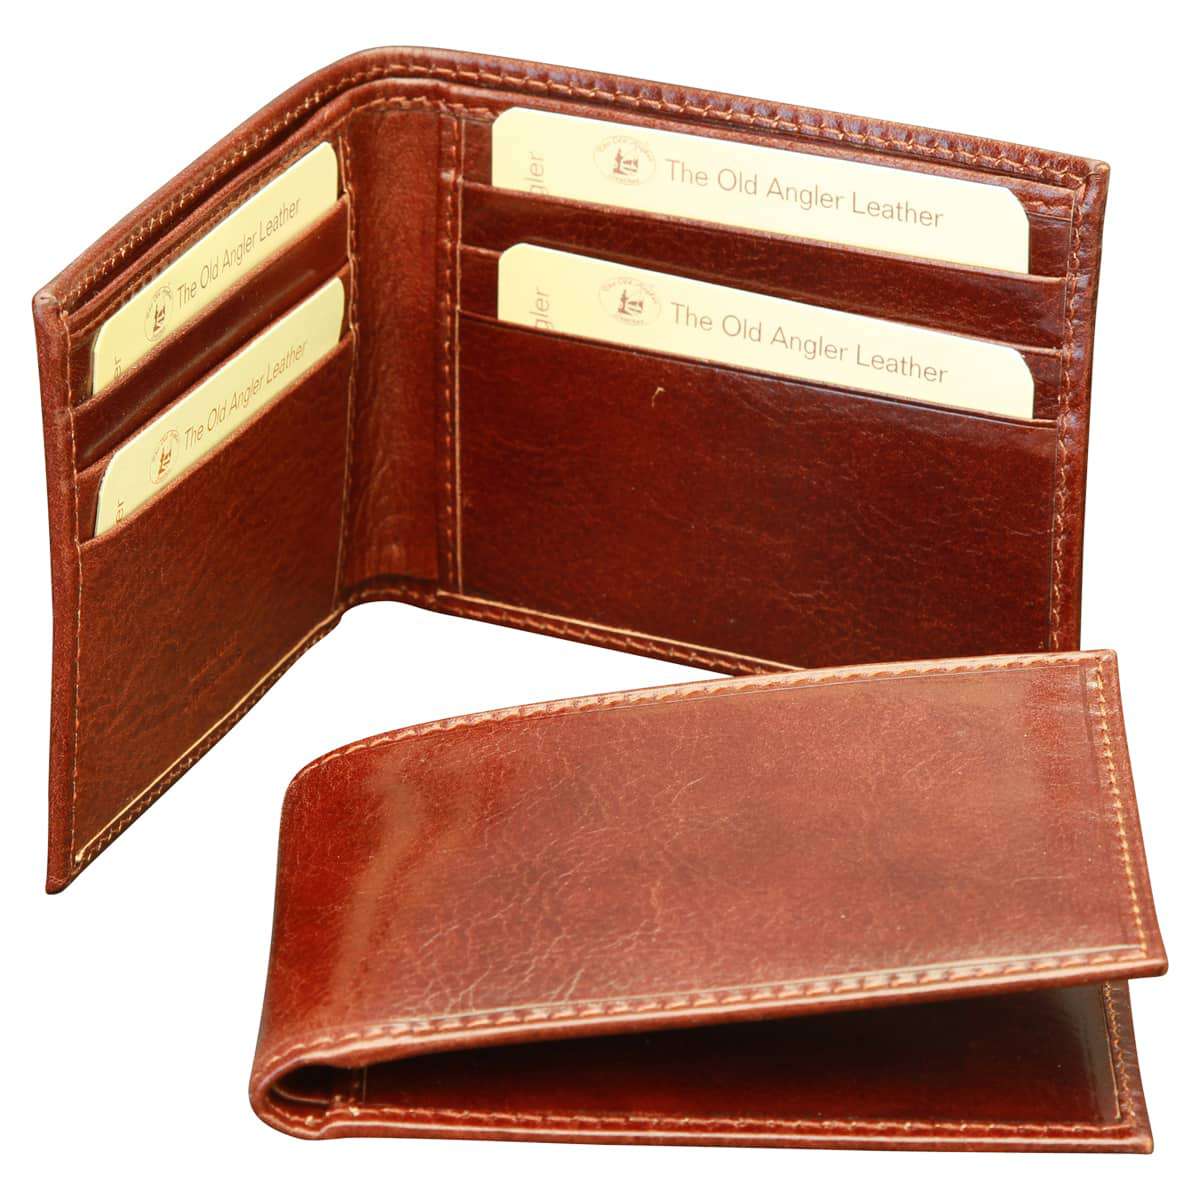 Bifold wallet with RFID blocking technology - Brown | 802605MA | EURO | Old Angler Firenze